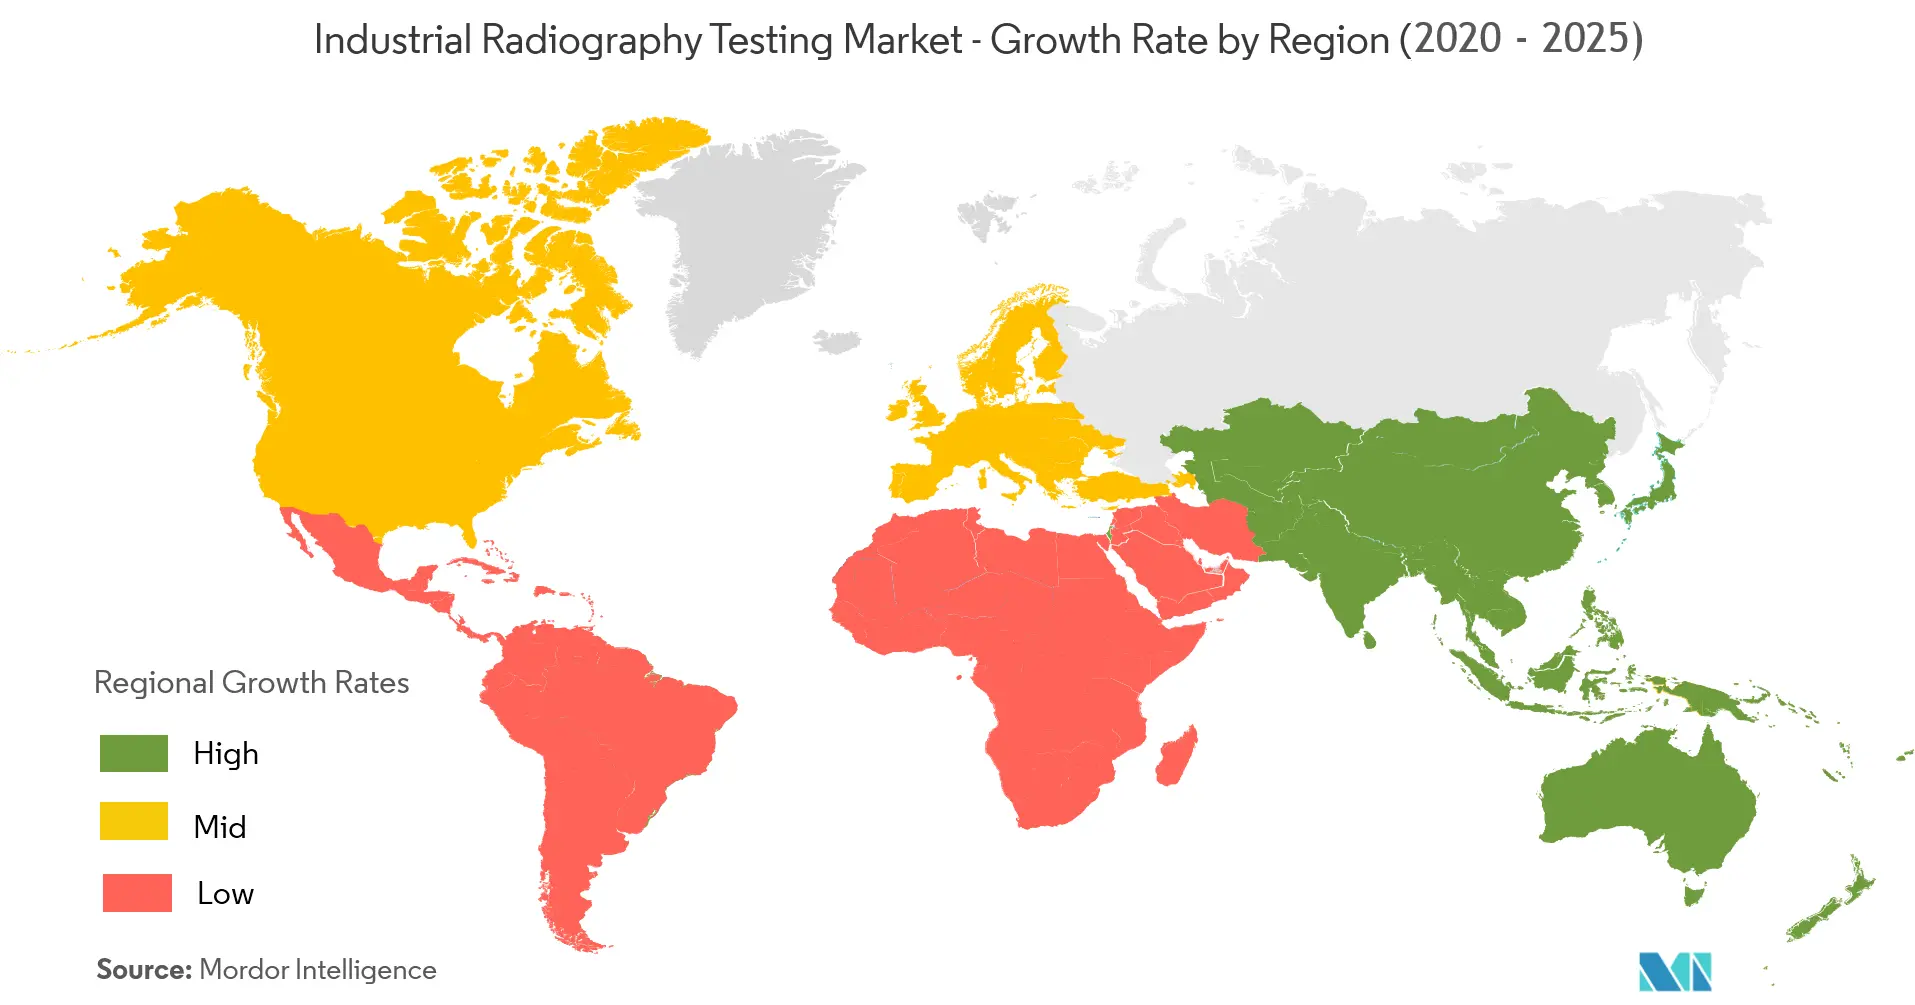 Industrial Radiography Testing Market - Growth Rate by Region (2020 - 2025)